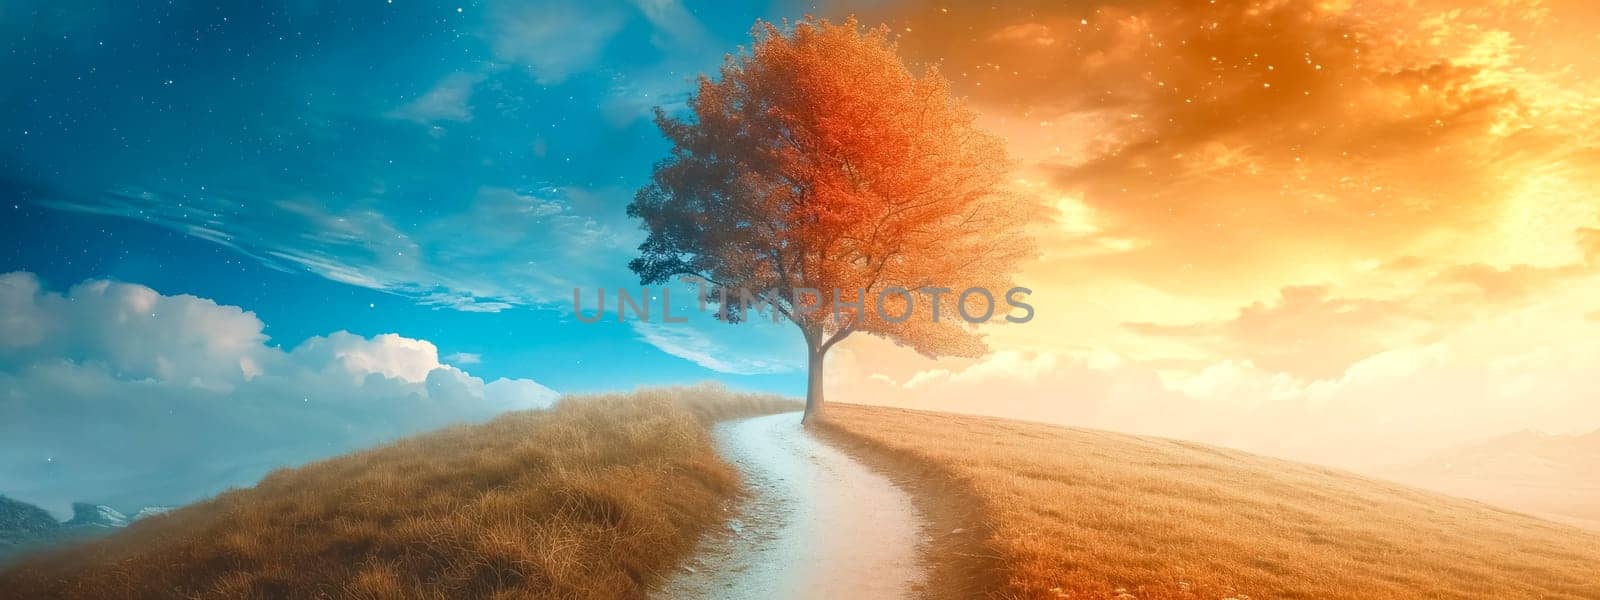 Scenic view of a split pathway under a vibrant tree with day and night sky merging, ideal for concept art by Edophoto